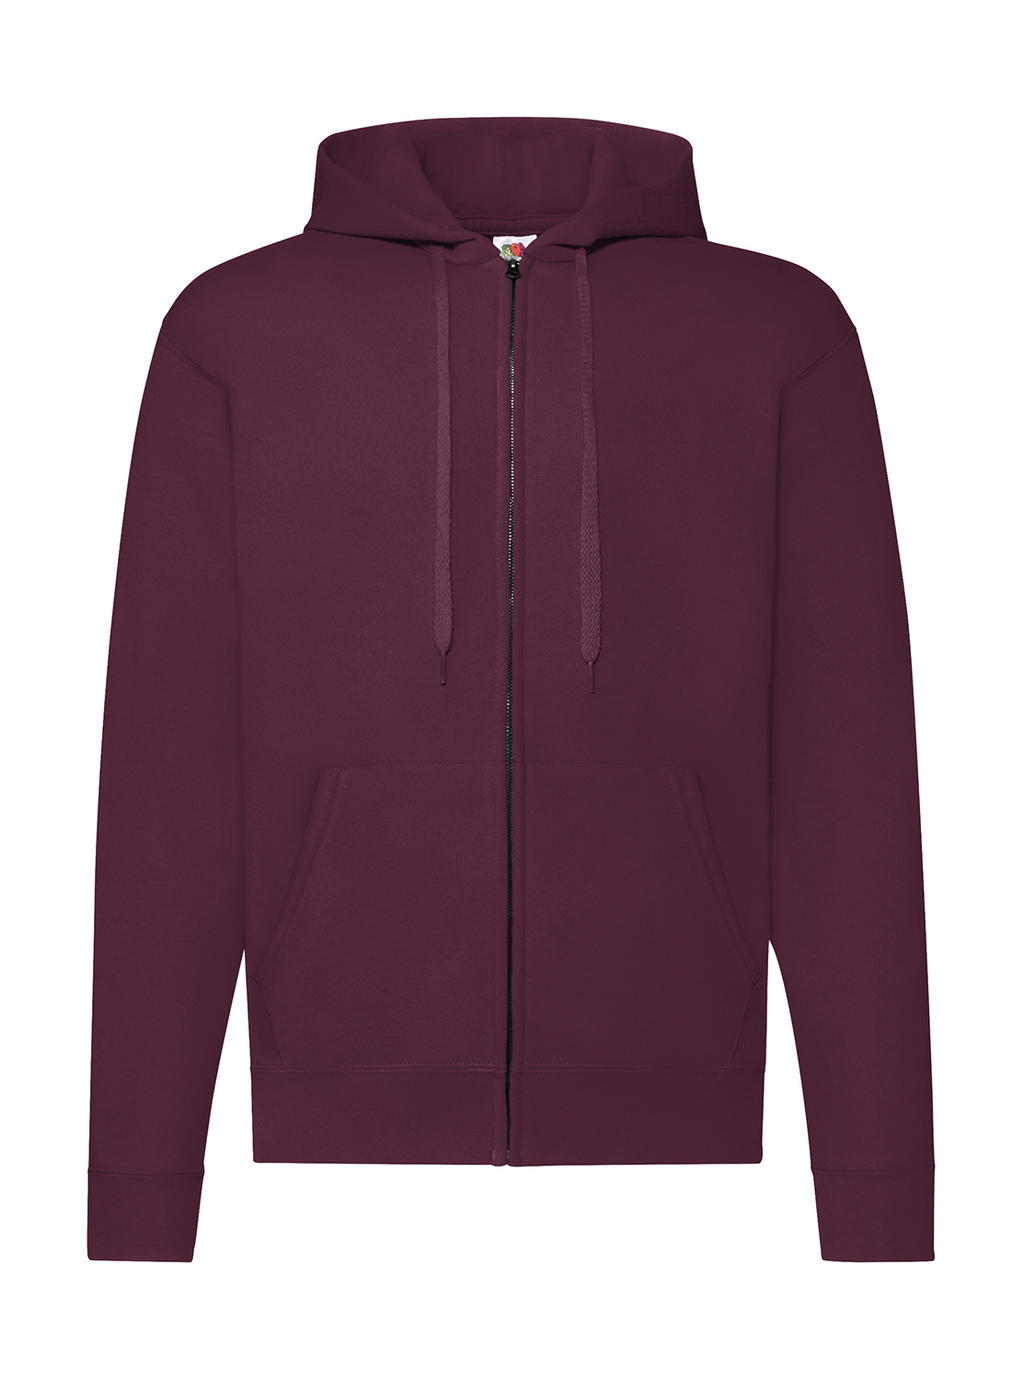  Classic Hooded Sweat Jacket in Farbe Burgundy